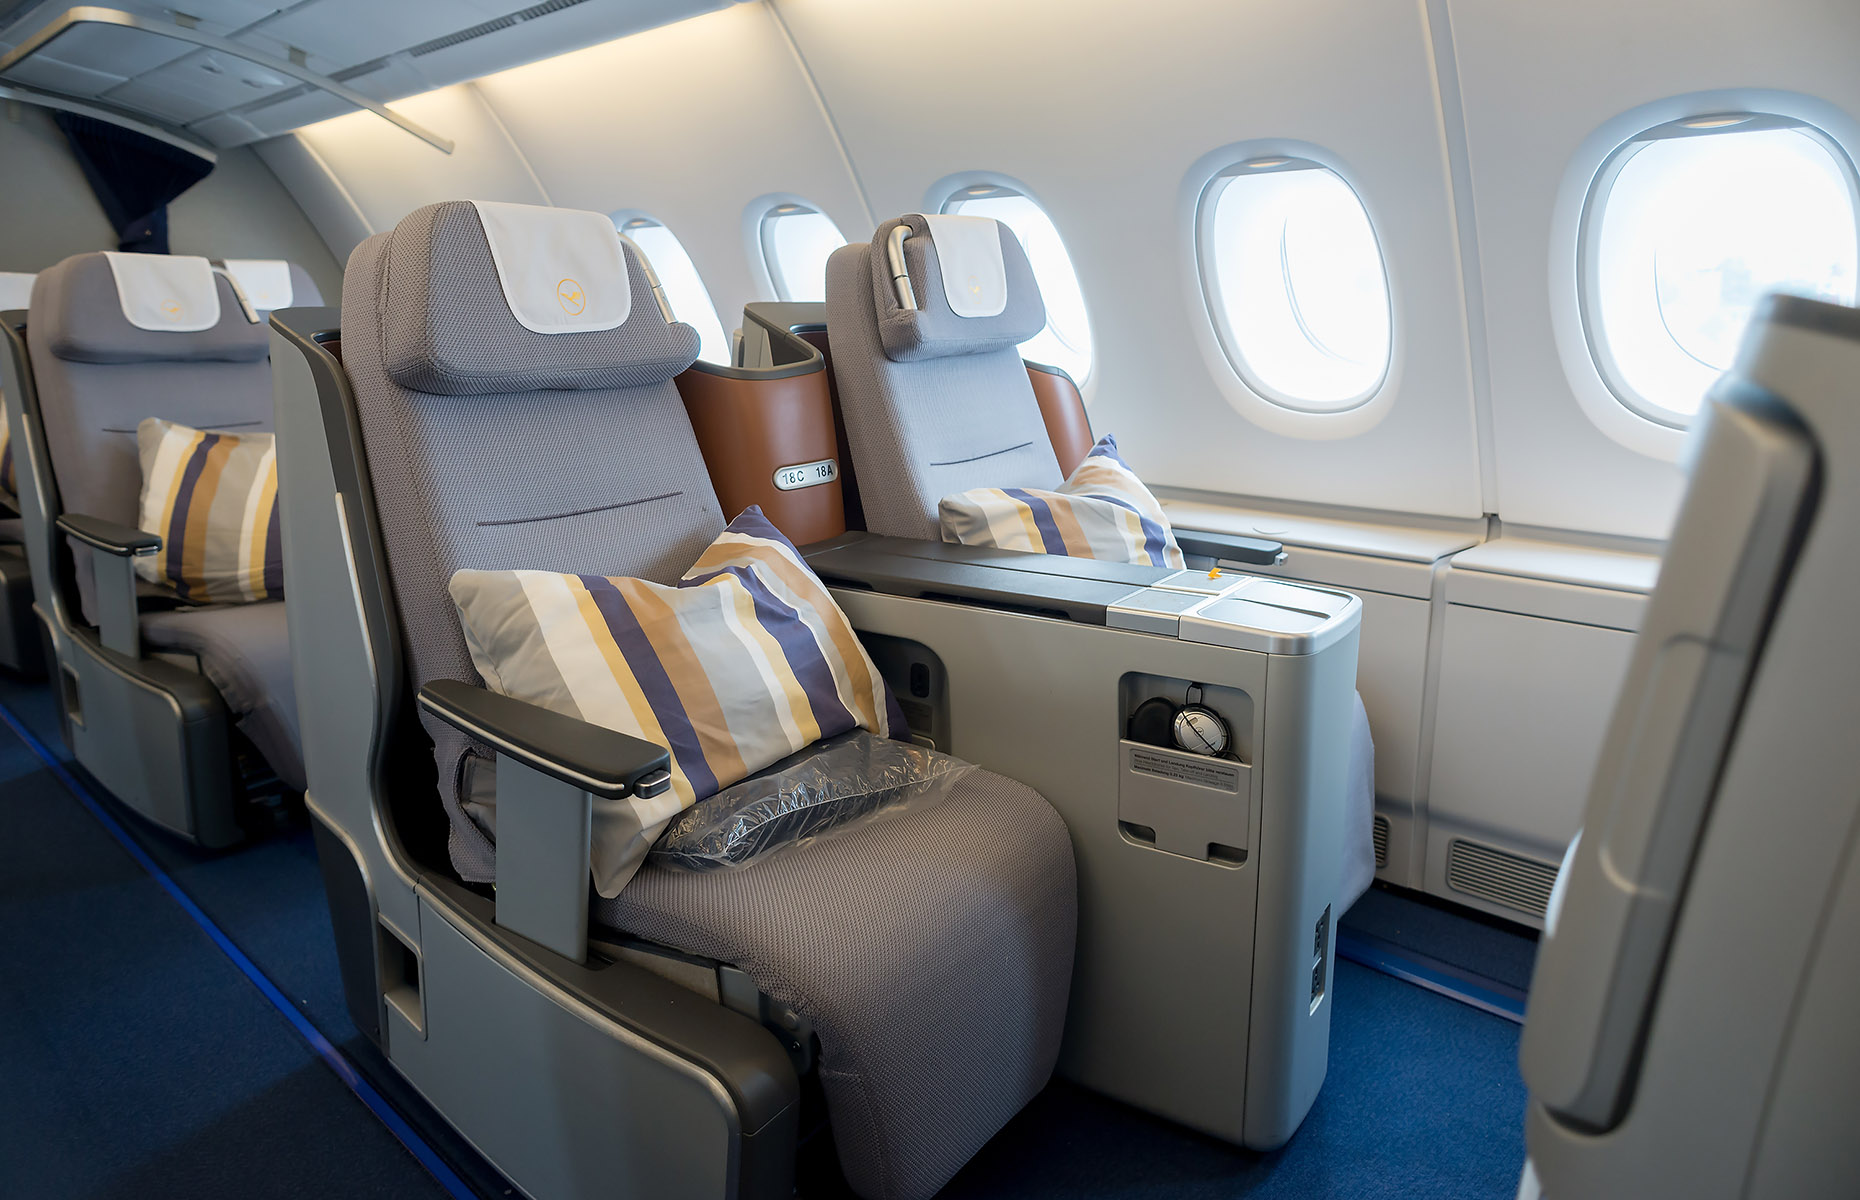 Cushion on seat in aircraft (Image: Stoyan Yotov/Shutterstock)